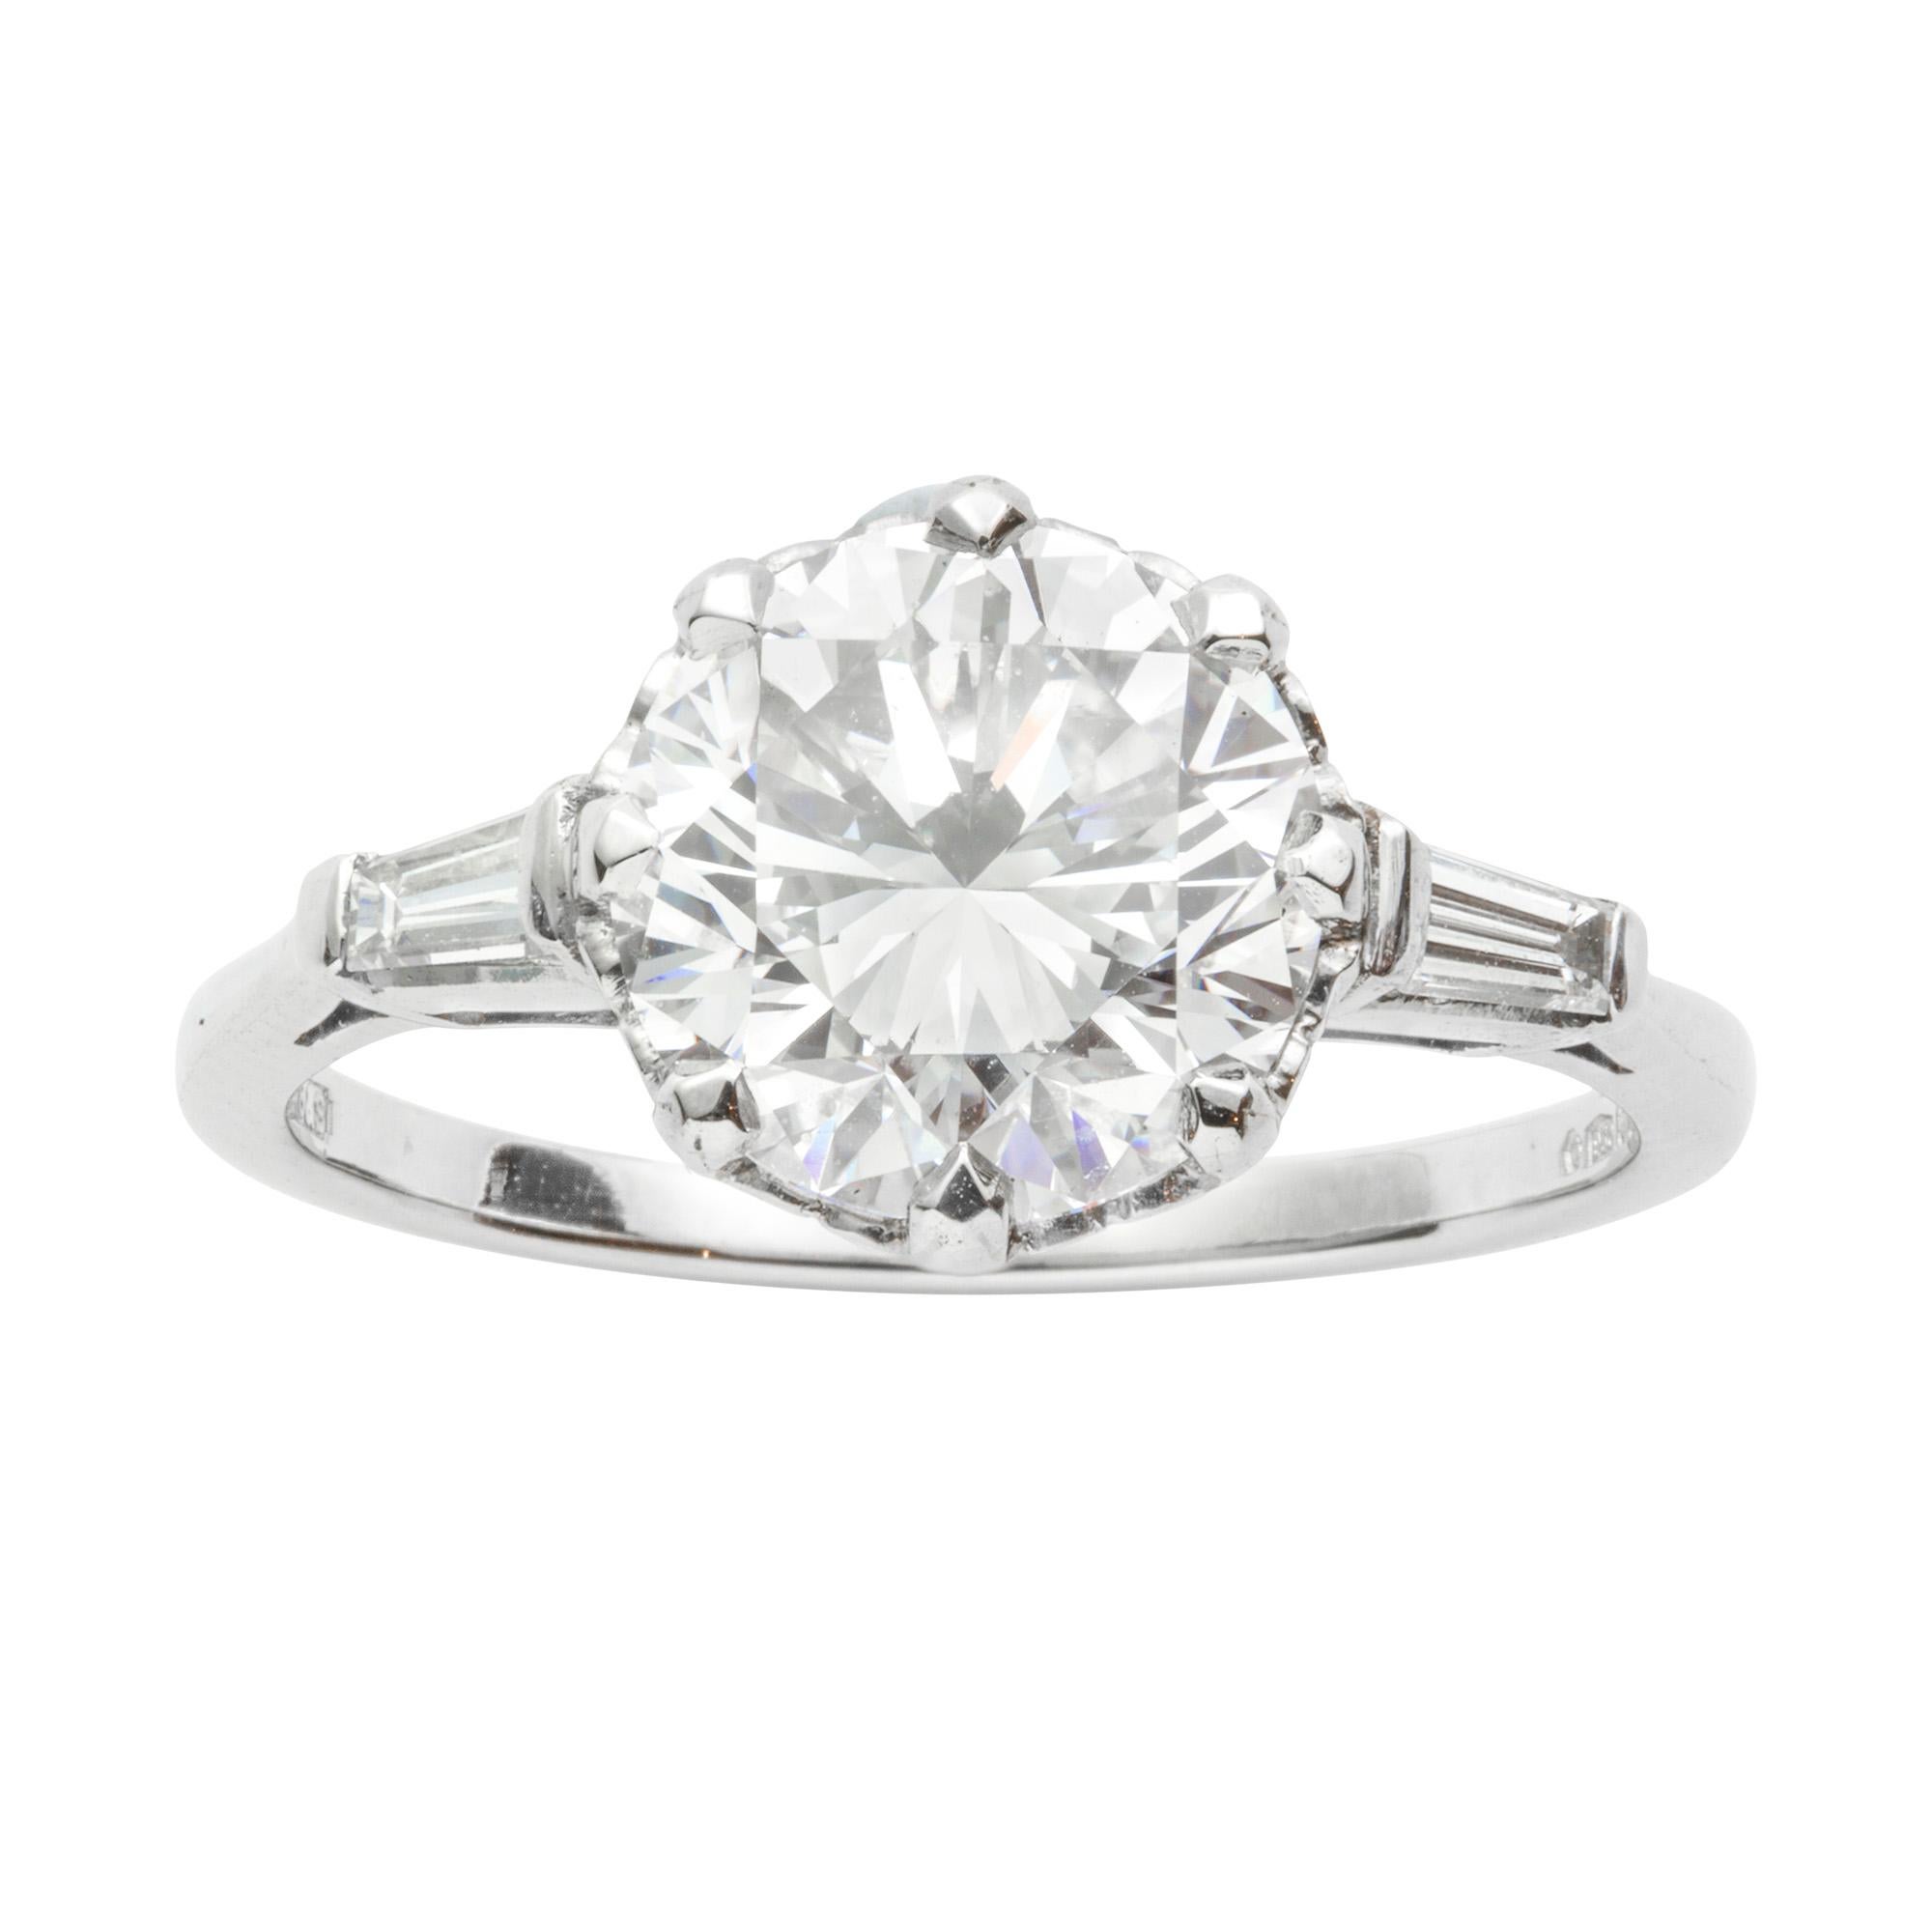 Round Cut GIA Certified 3.19 Carat Solitaire Diamond Ring For Sale